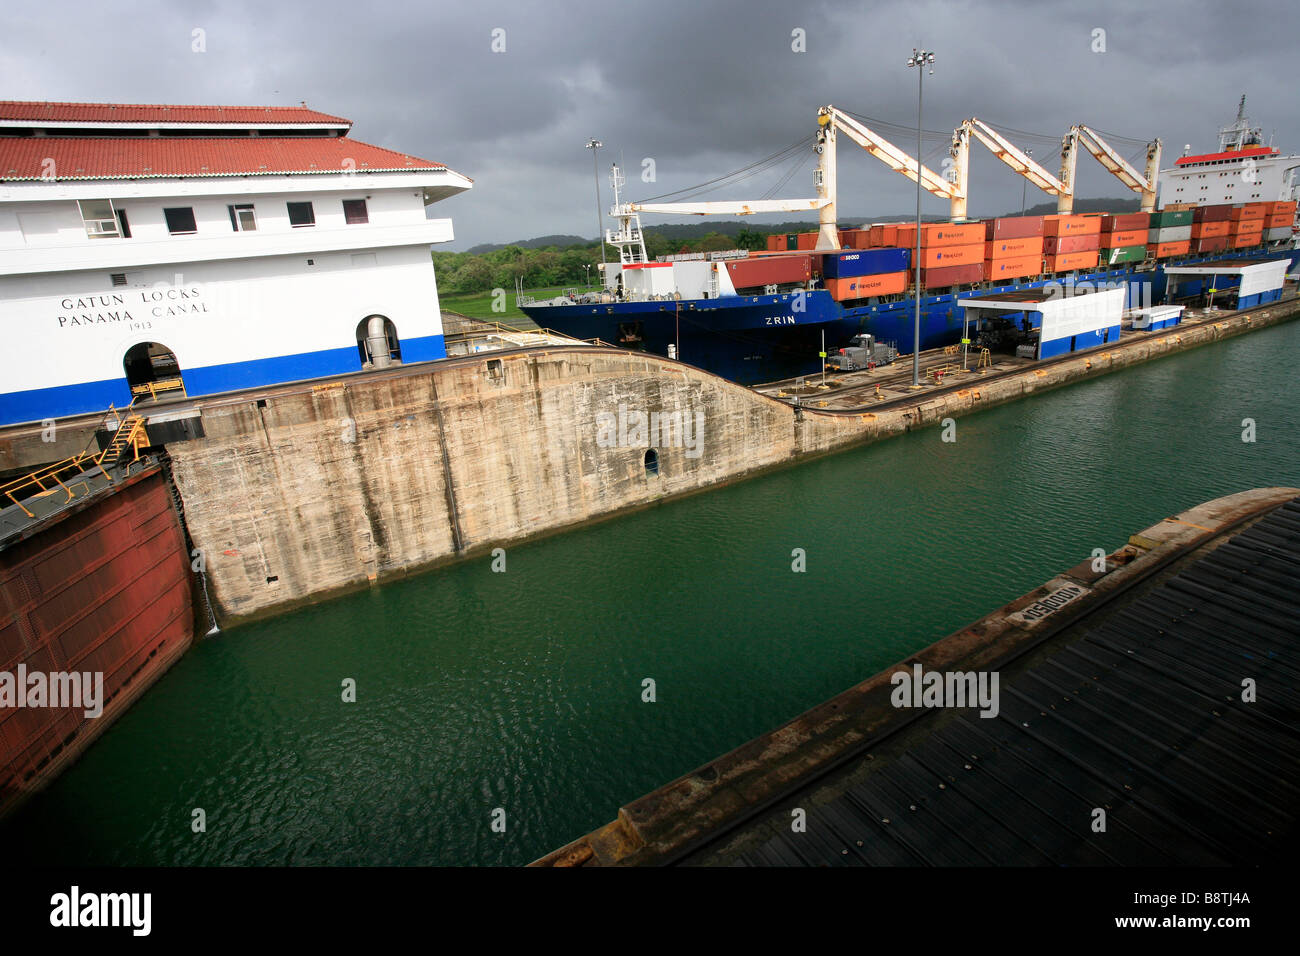 The Panama Canal locks (Spanish: Esclusas del Canal de Panamá) are a lock system that lifts a ship up 85 feet (26 m.) to the main elevation. Galun. Stock Photo